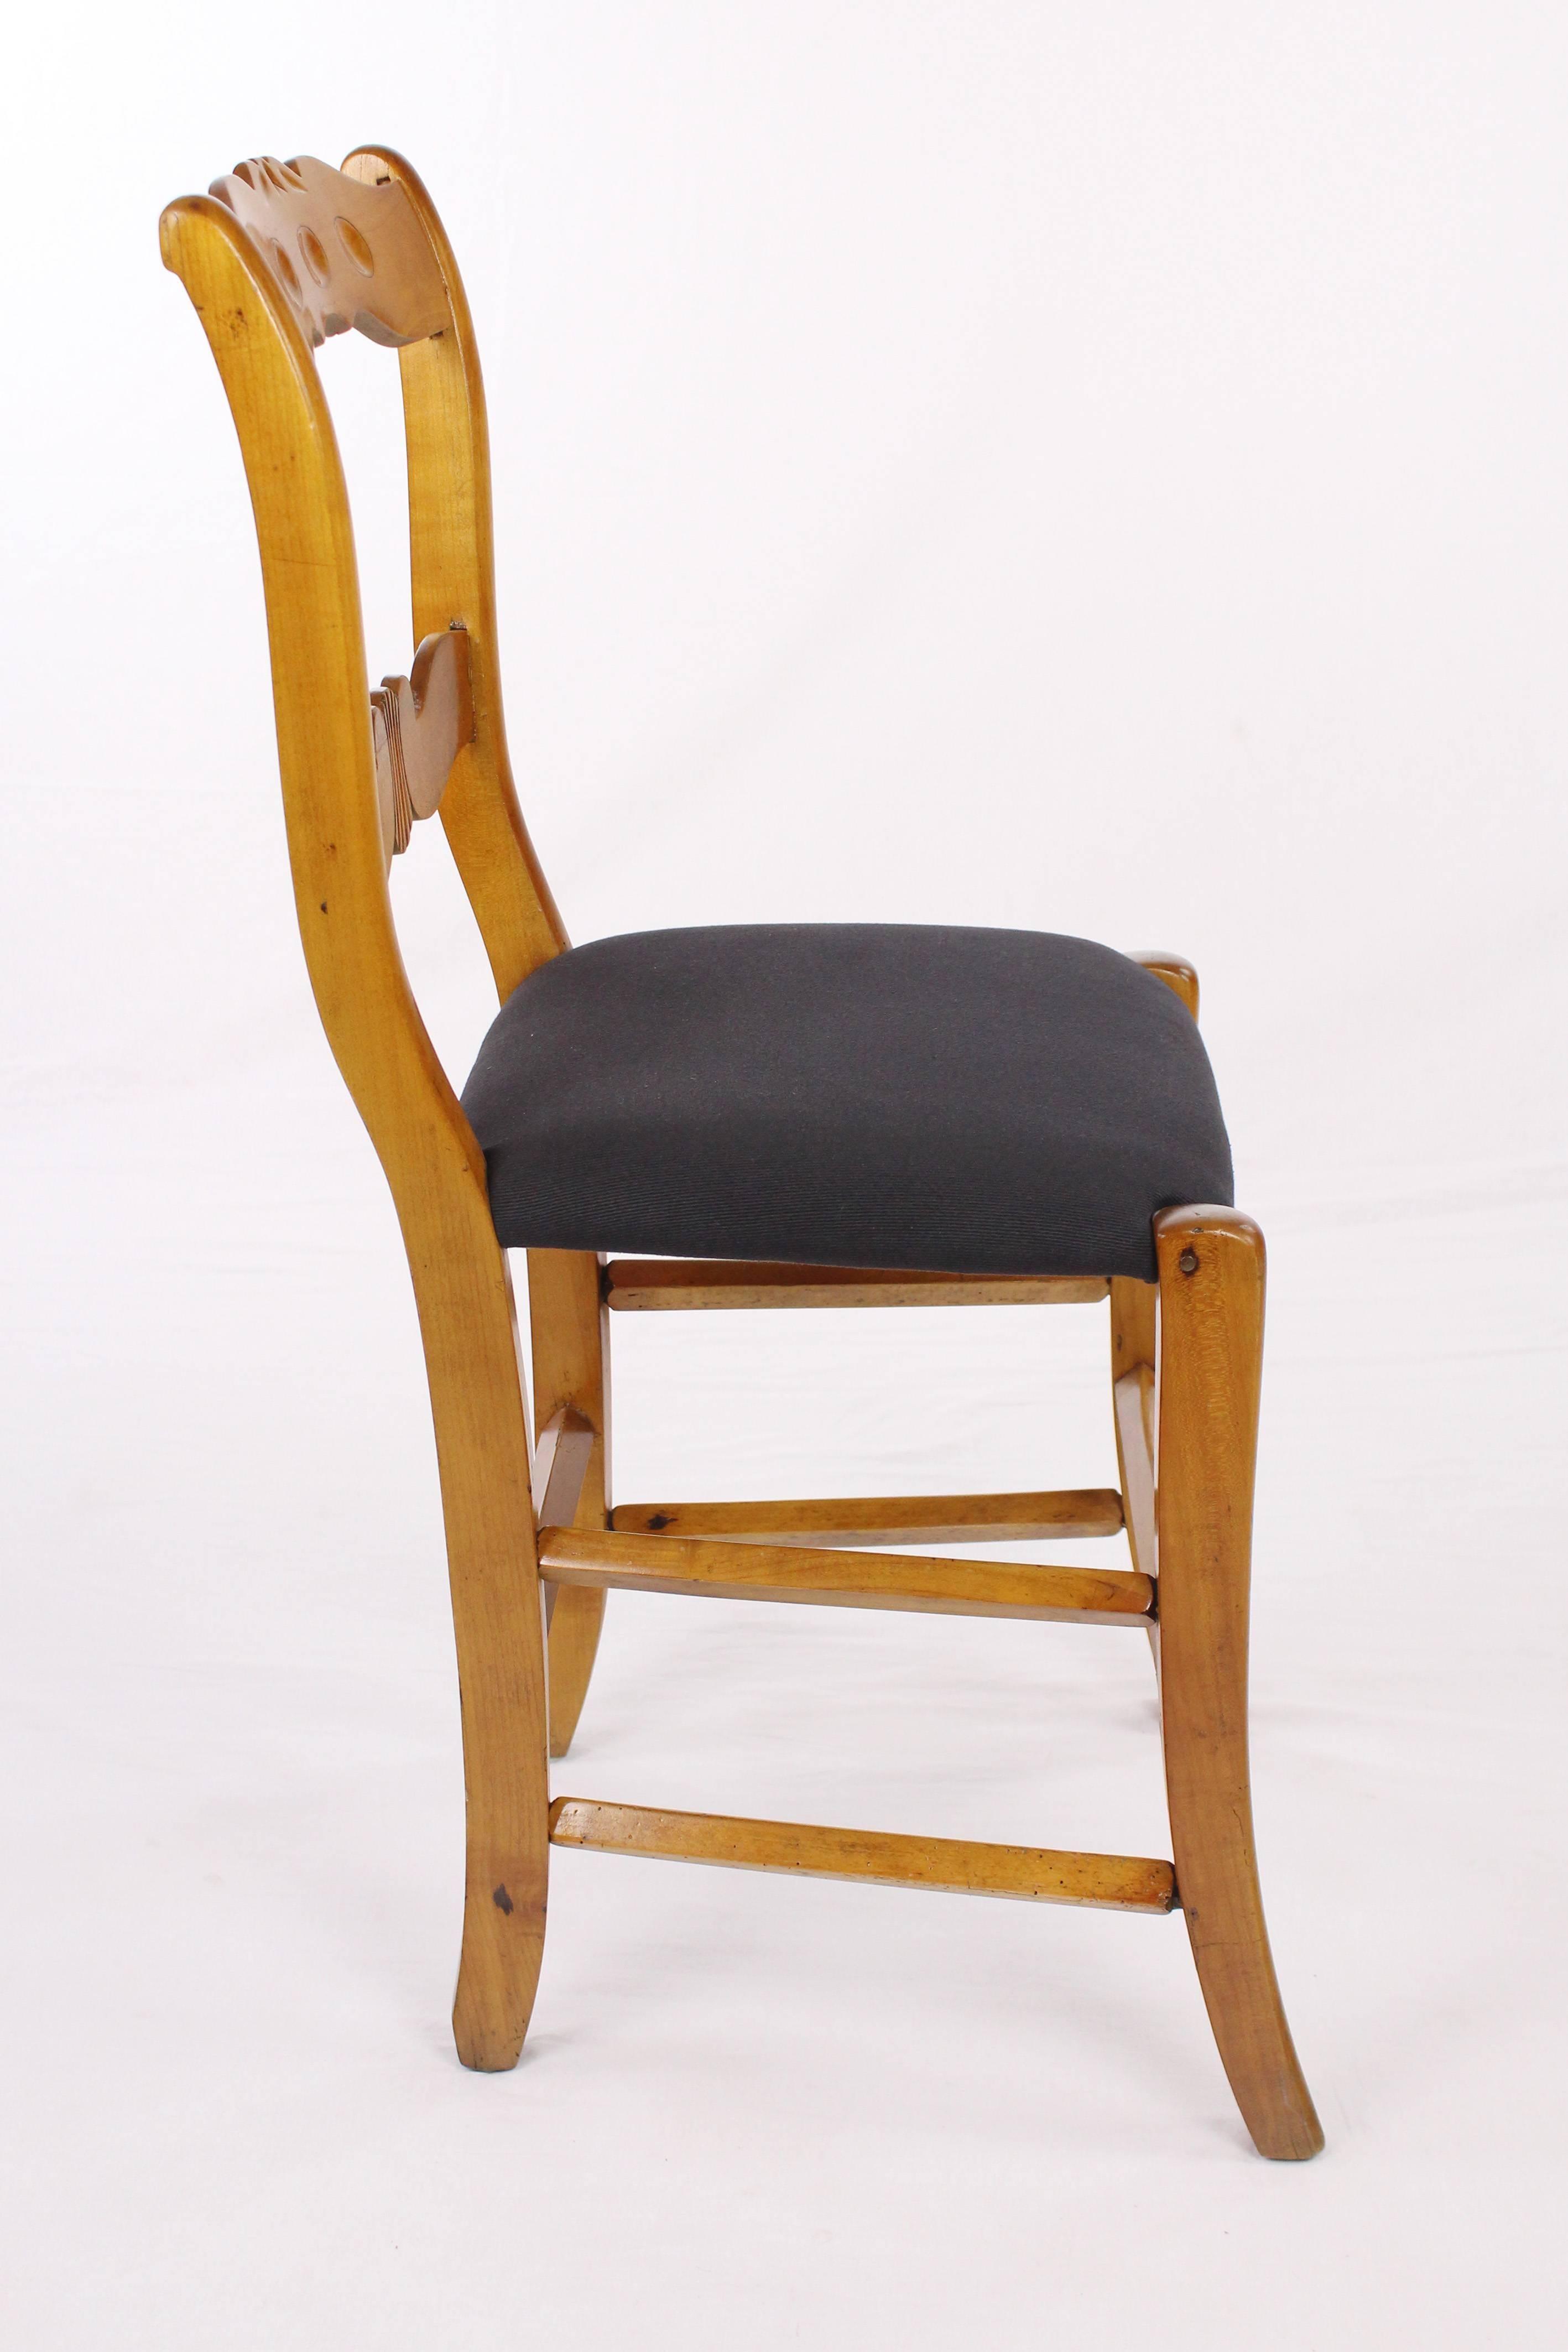 Set of 4 rustic Biedermeier Period Chairs, Germany circa 1830 Massive Cherrywood For Sale 1